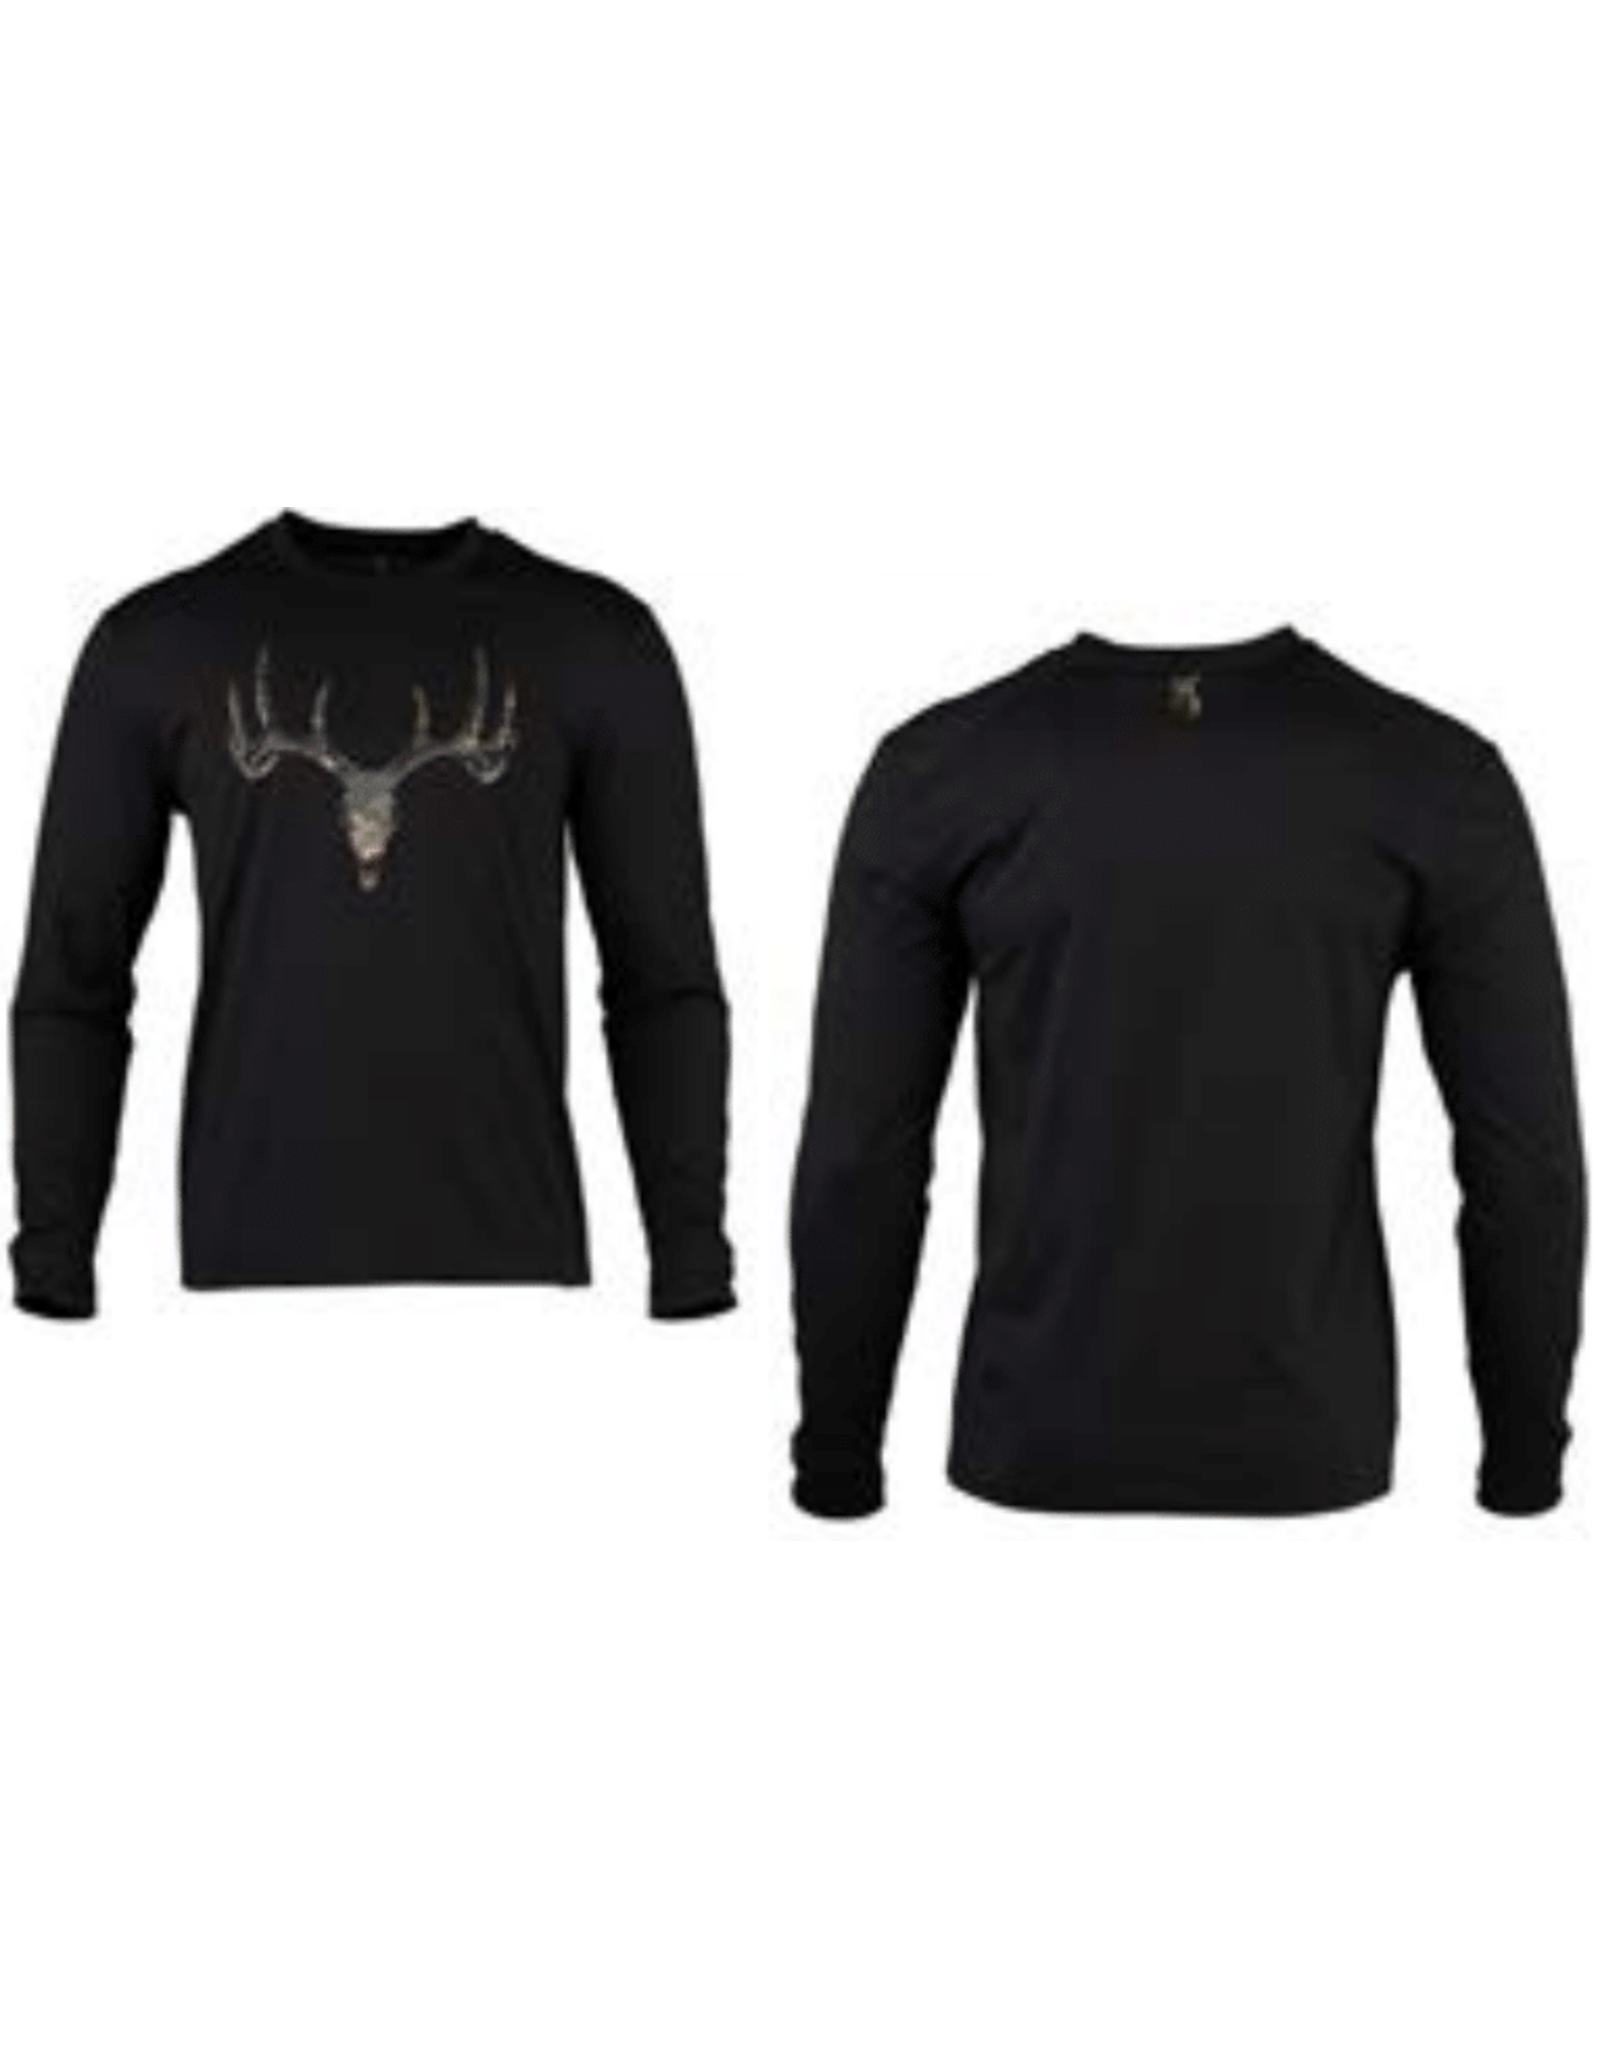 Browning Camp Long Sleeve Shirt - White Tail - Black - Small